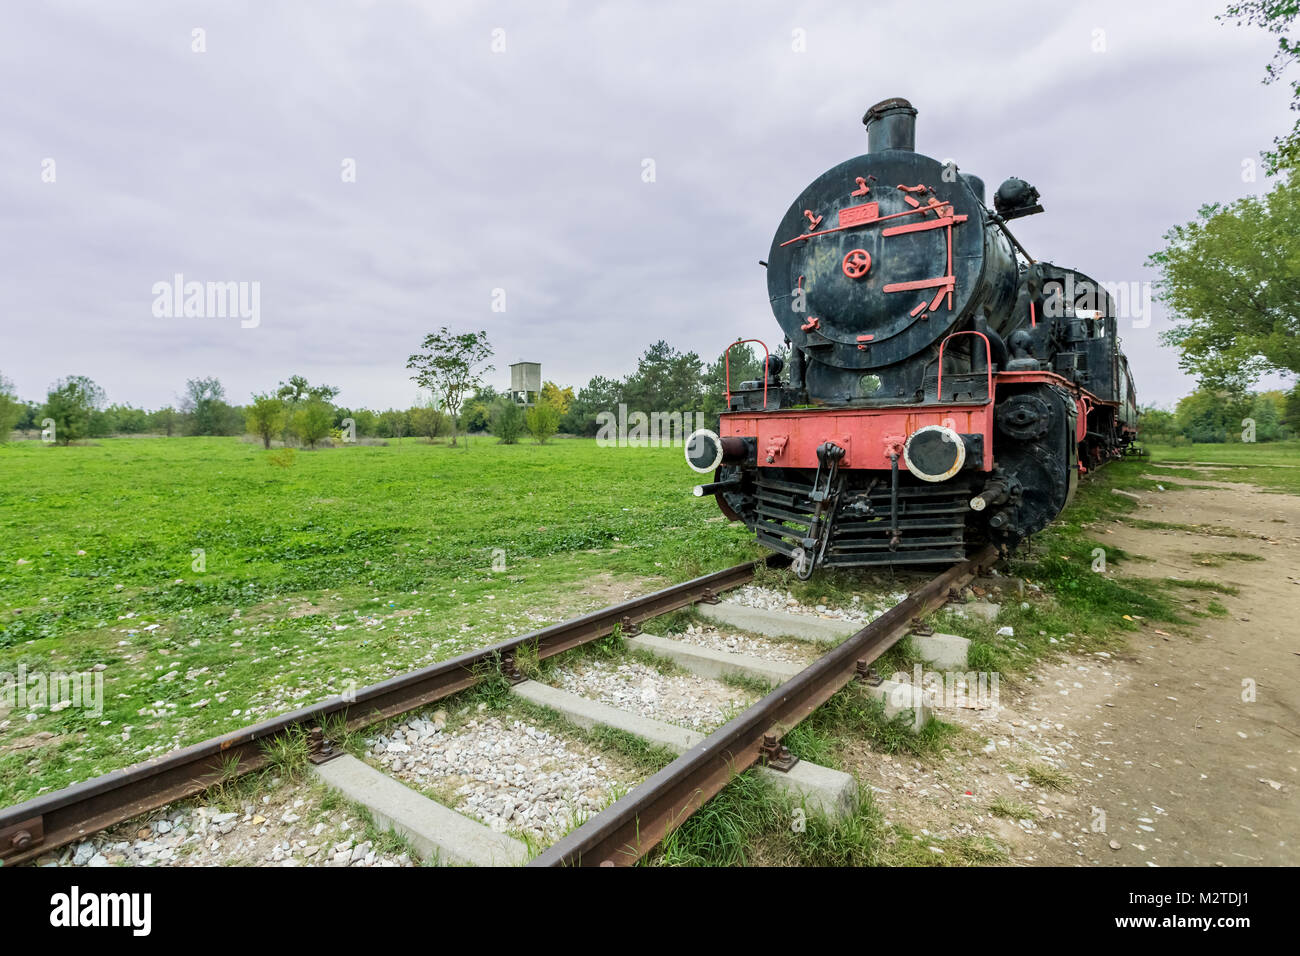 Steam power train from Orient Express era at the old railway station in Edirne,Turkey.17 October 2015 Stock Photo